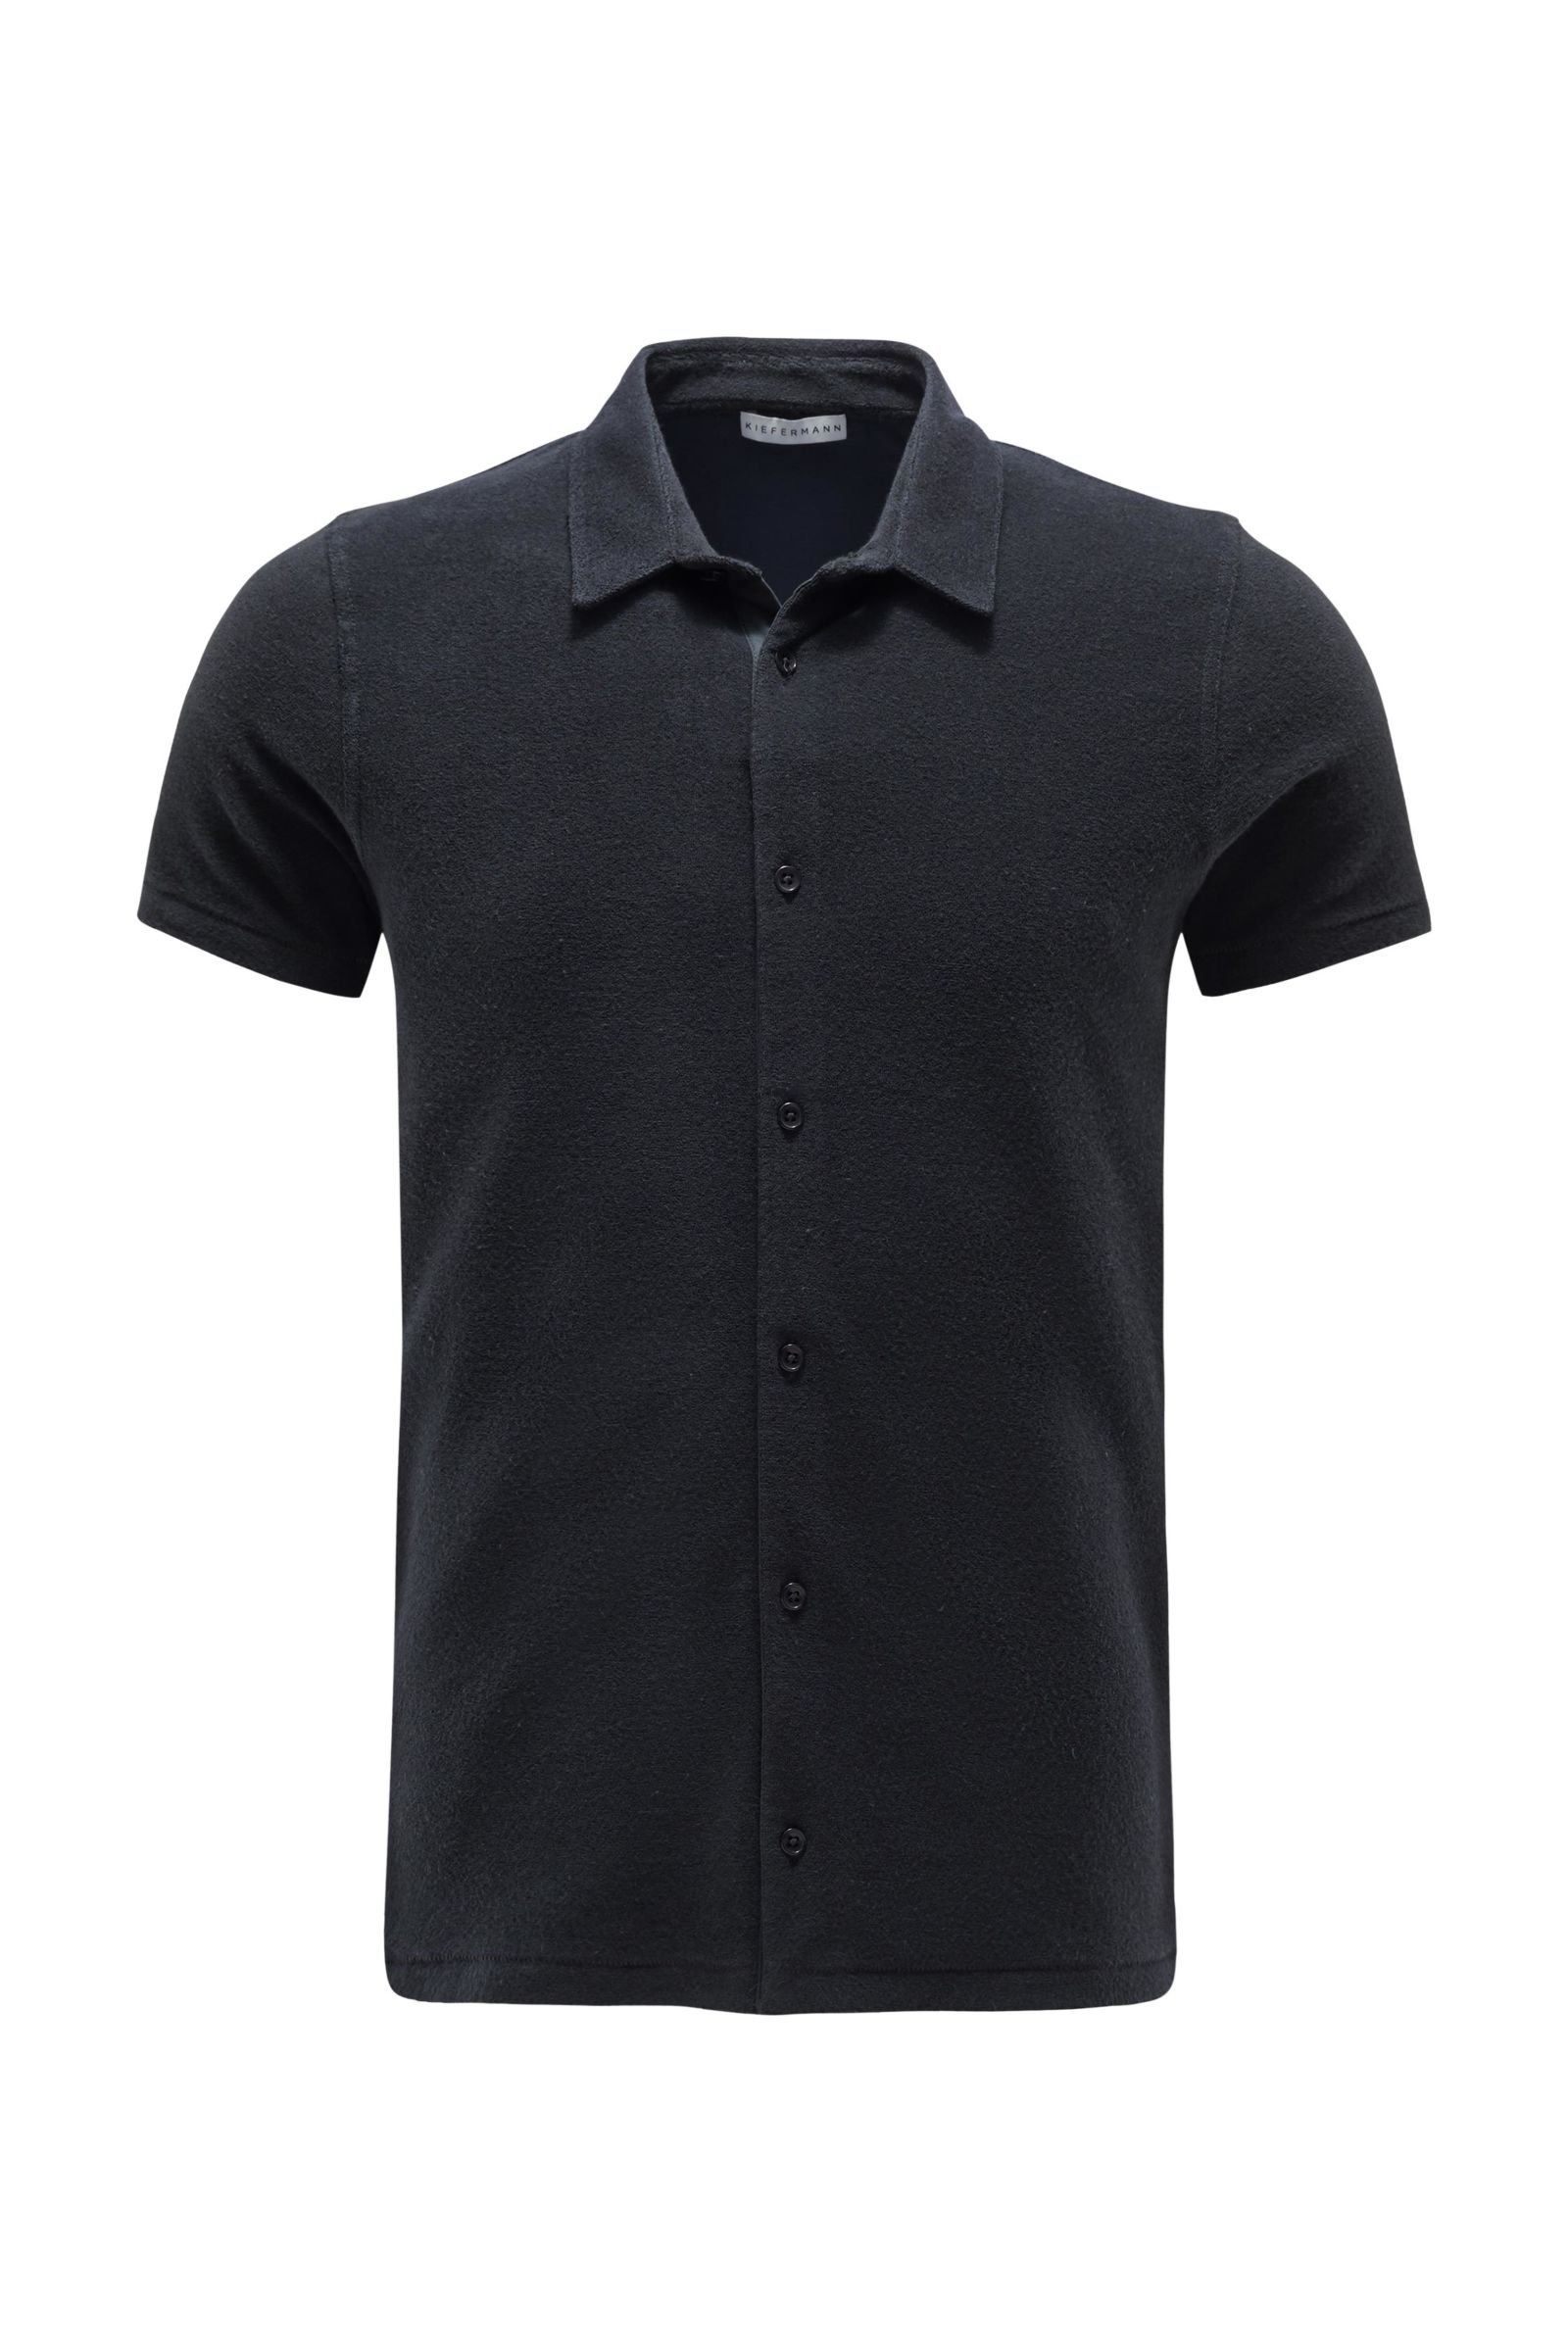 Terry short sleeve shirt 'Curtis' anthracite